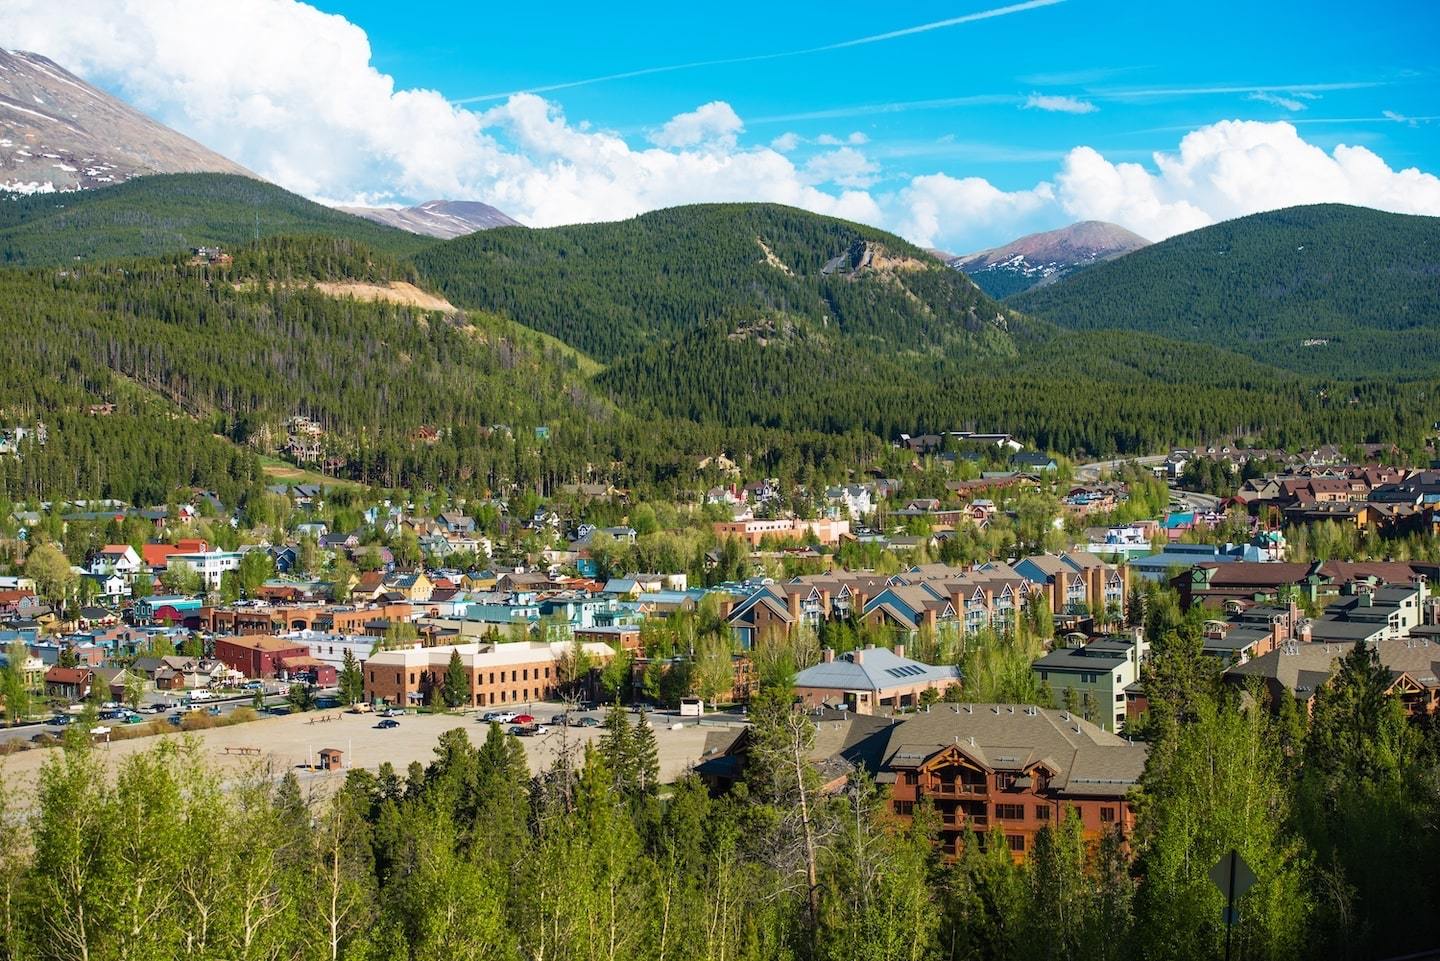 Wide view of Breckenridge town and surrounding mountains